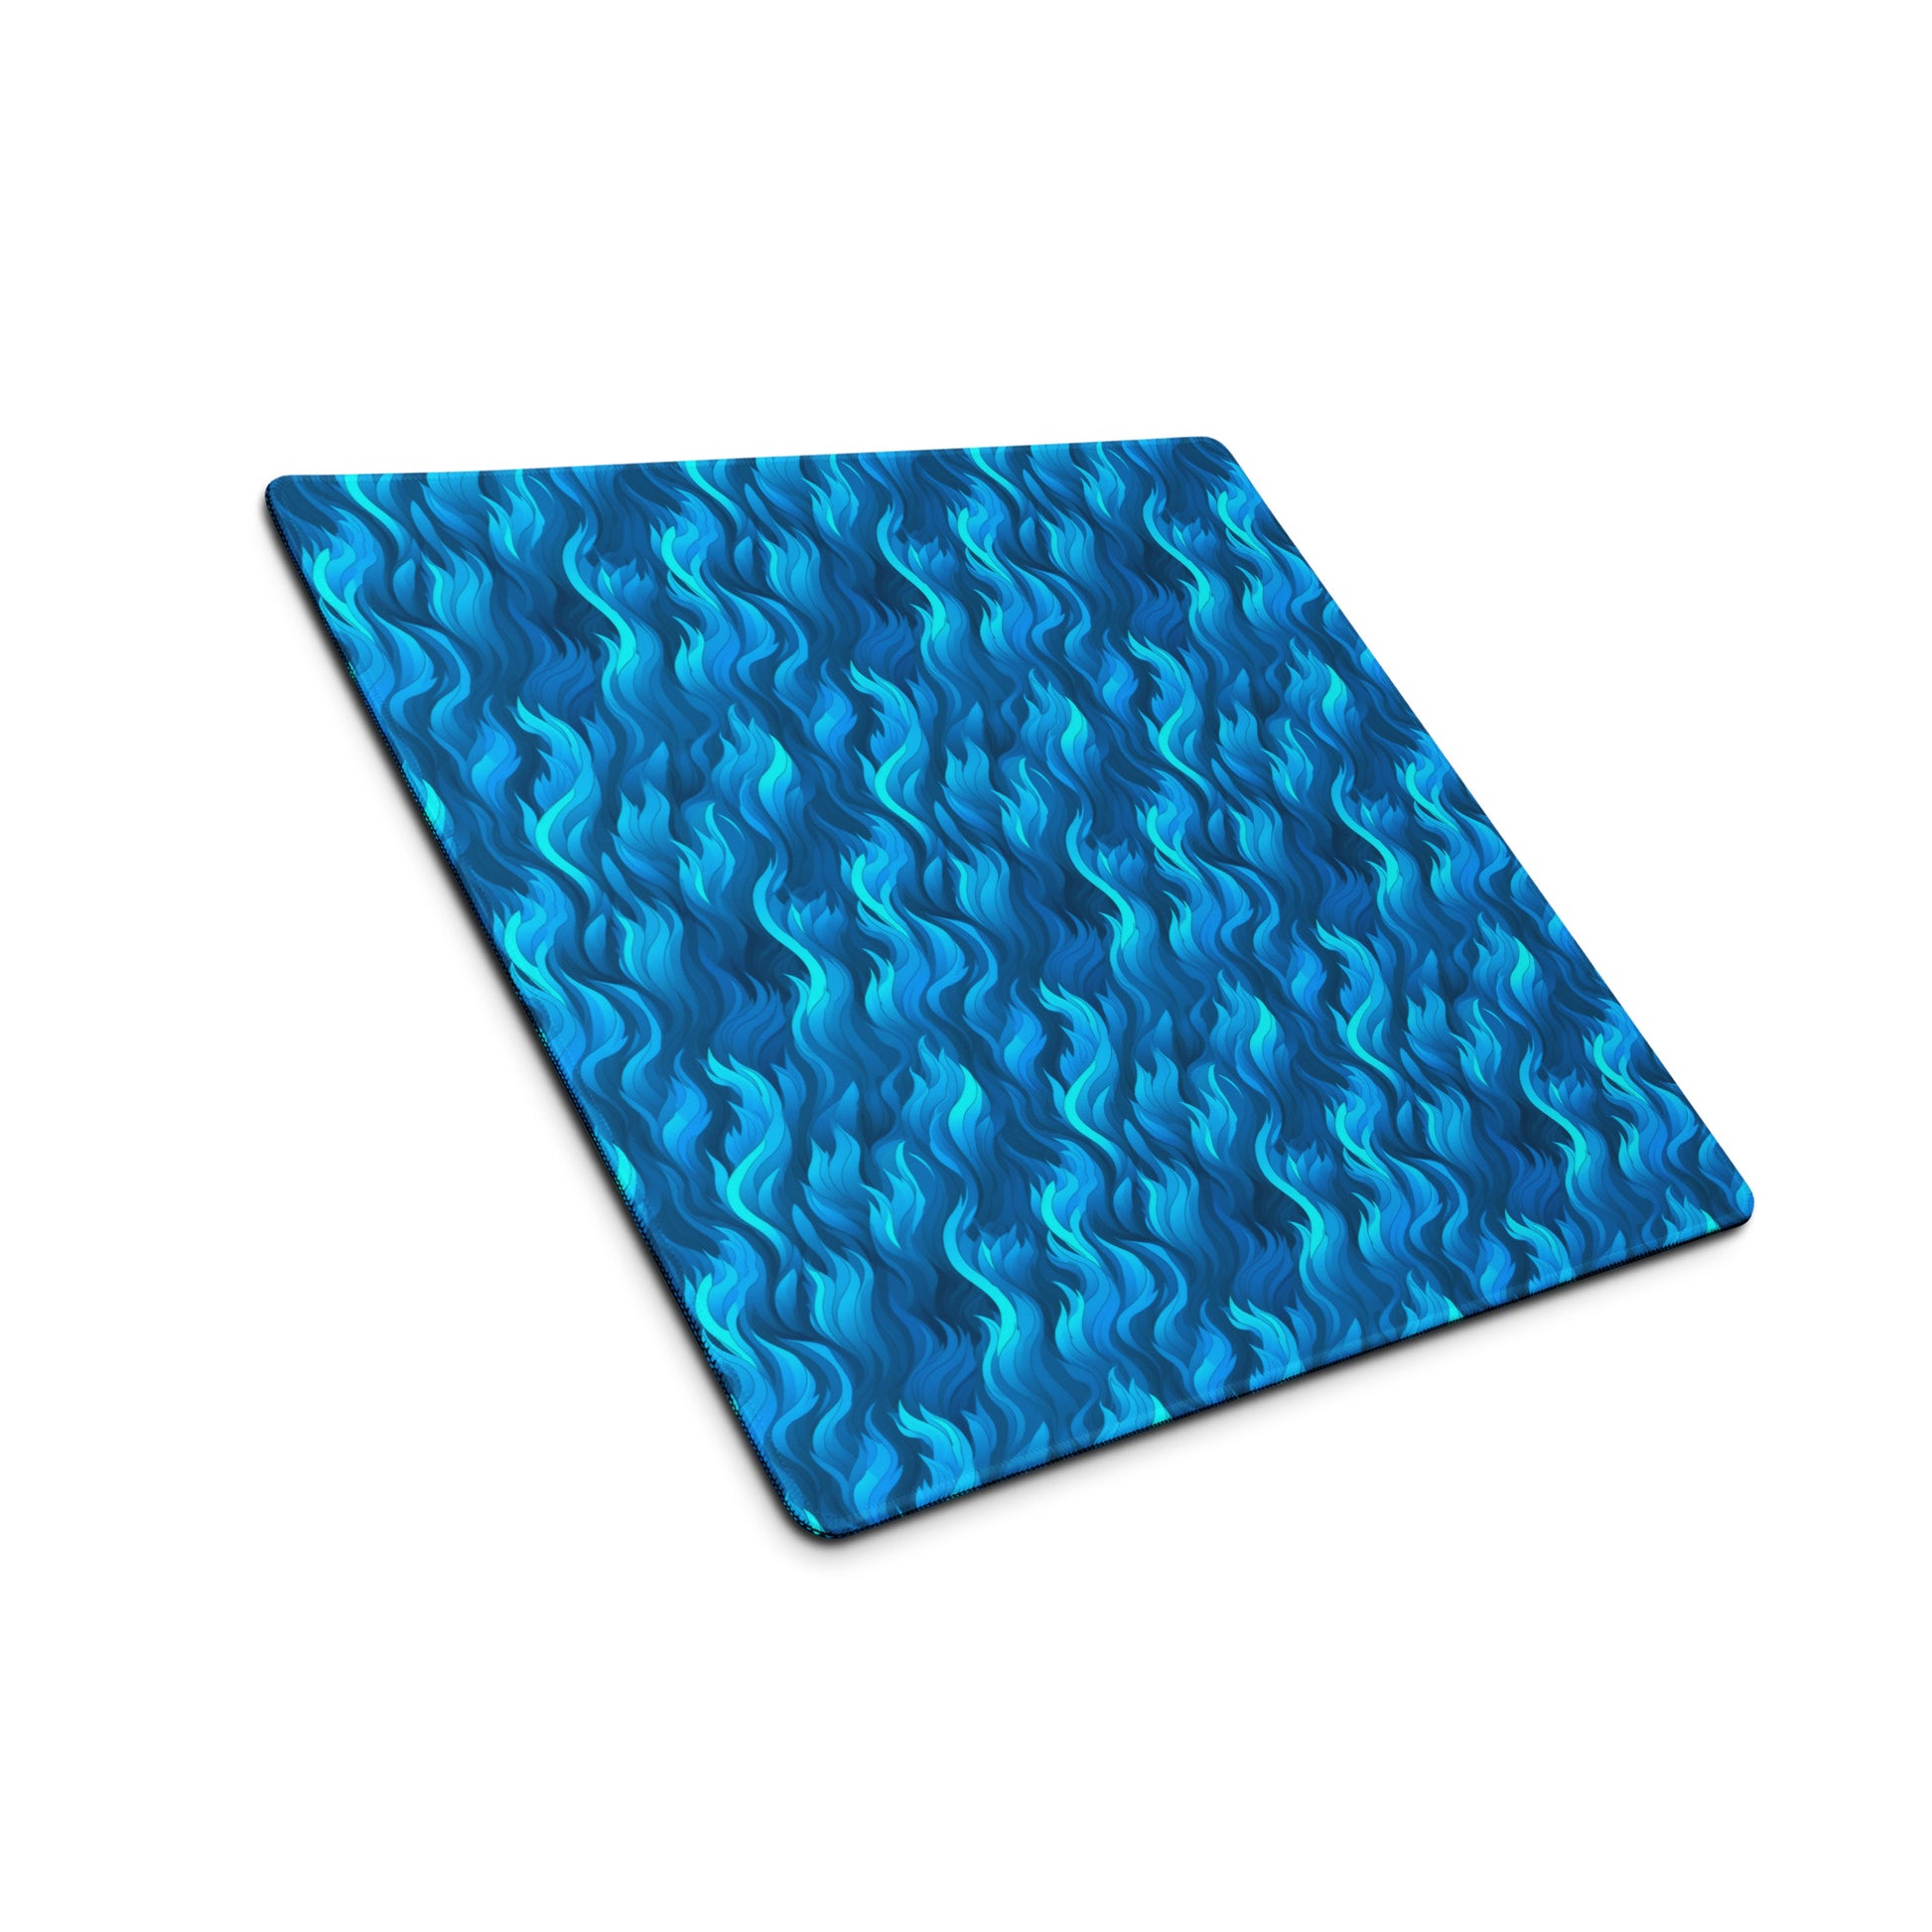 A 18" x 16" desk pad with a wavy flame pattern on it shown at an angle. Blue in color.